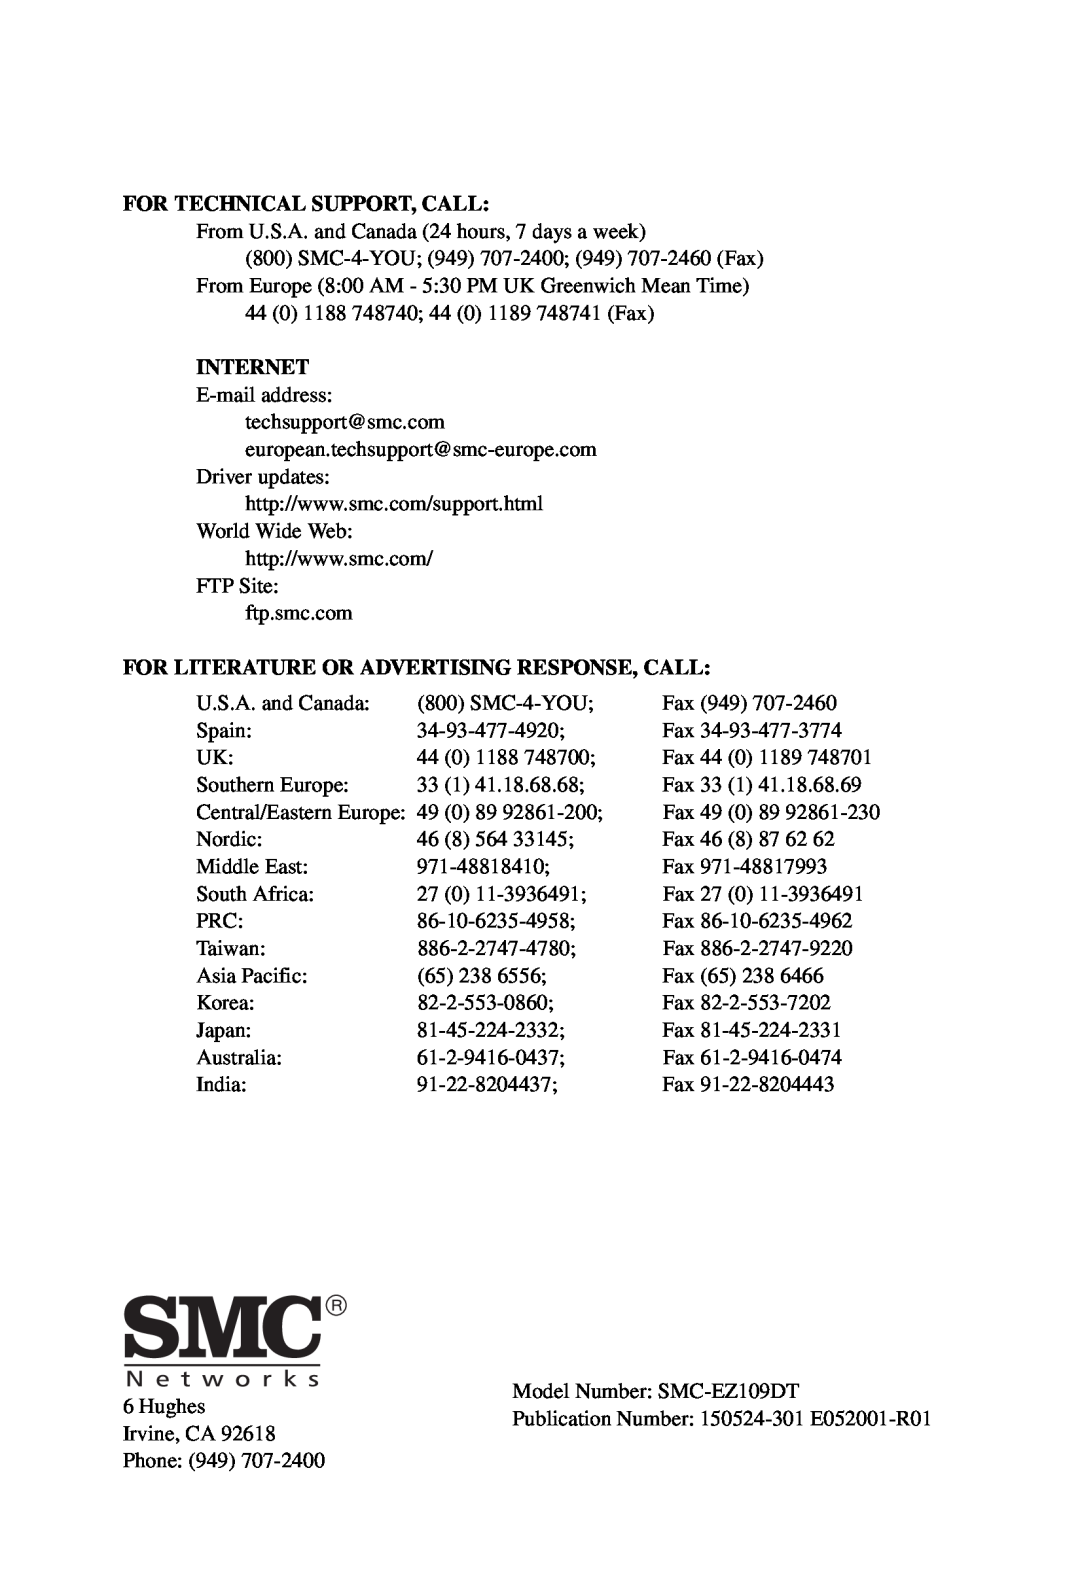 SMC Networks SMC-EZ1024DT manual For Technical Support, Call, Internet, For Literature Or Advertising Response, Call 